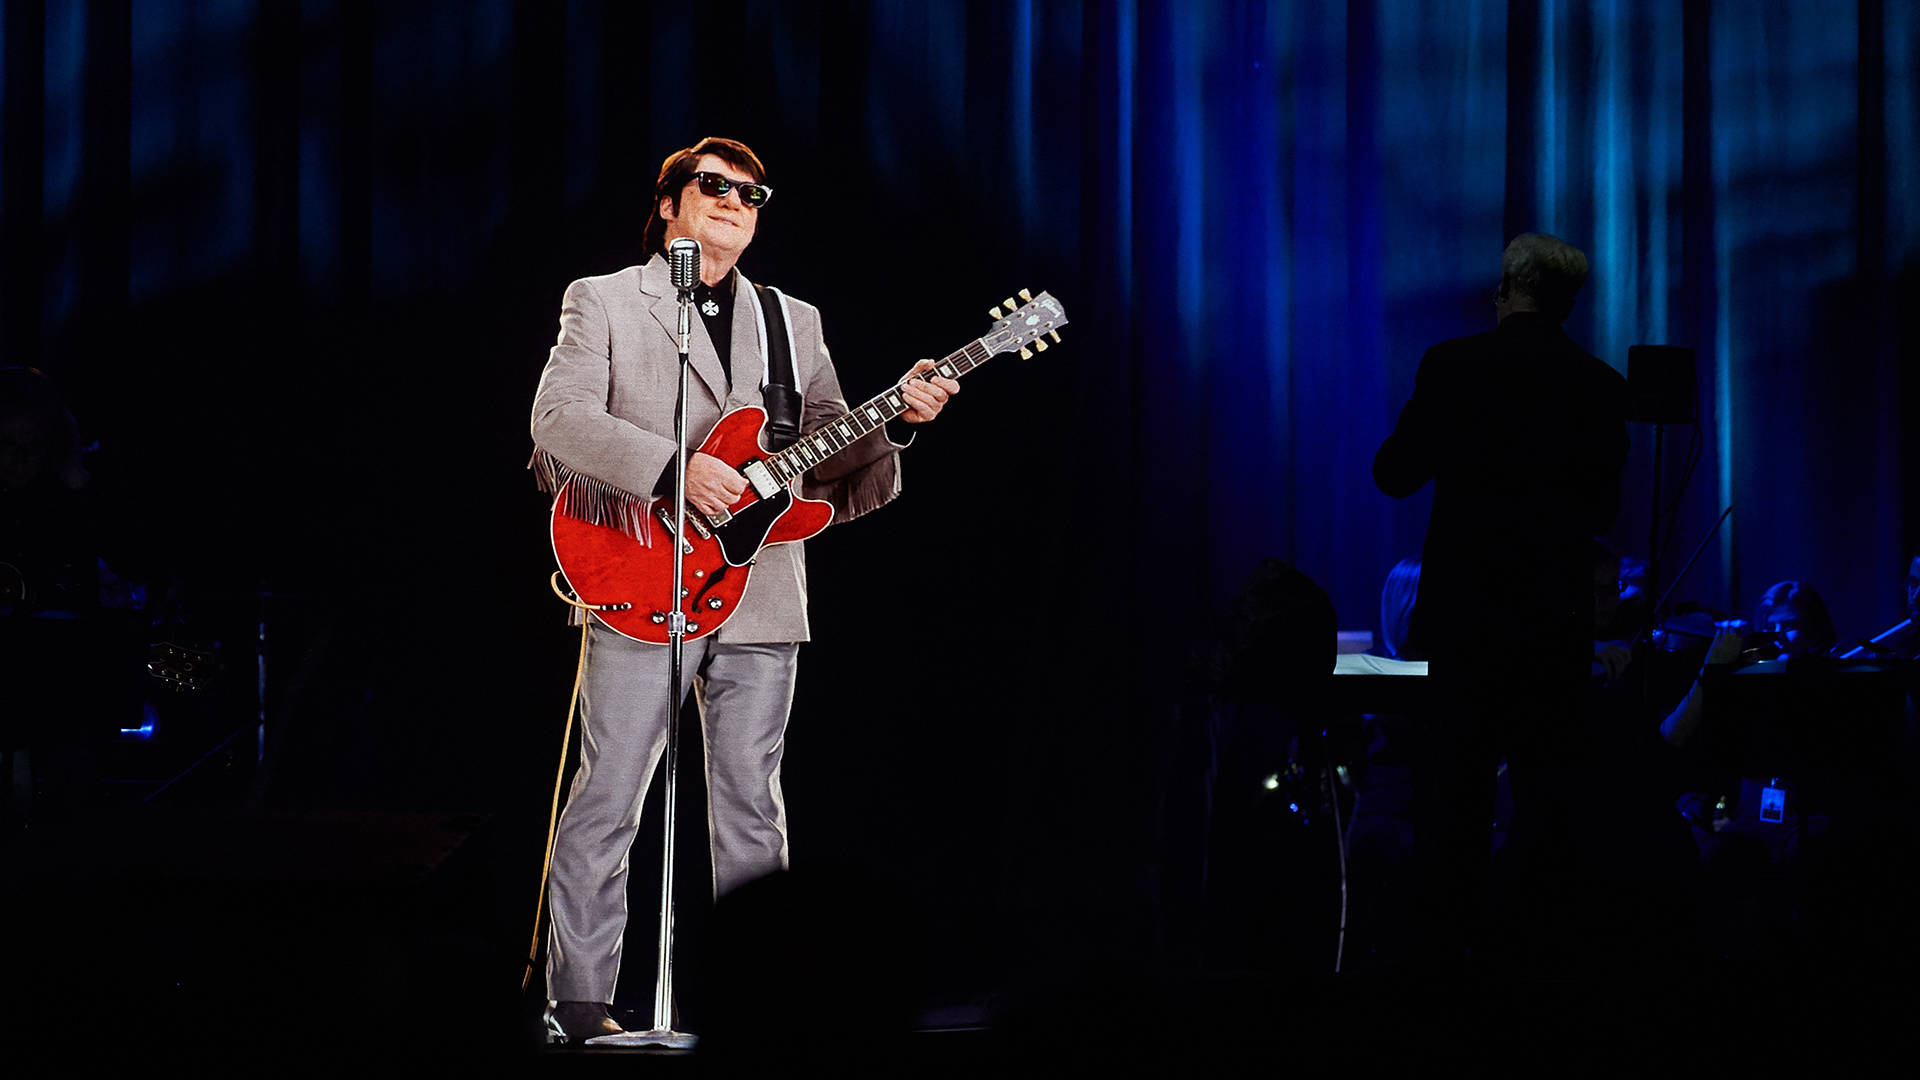 In Dreams A Roy Orbison Hologram Es To The Fox Theater Kqed Arts